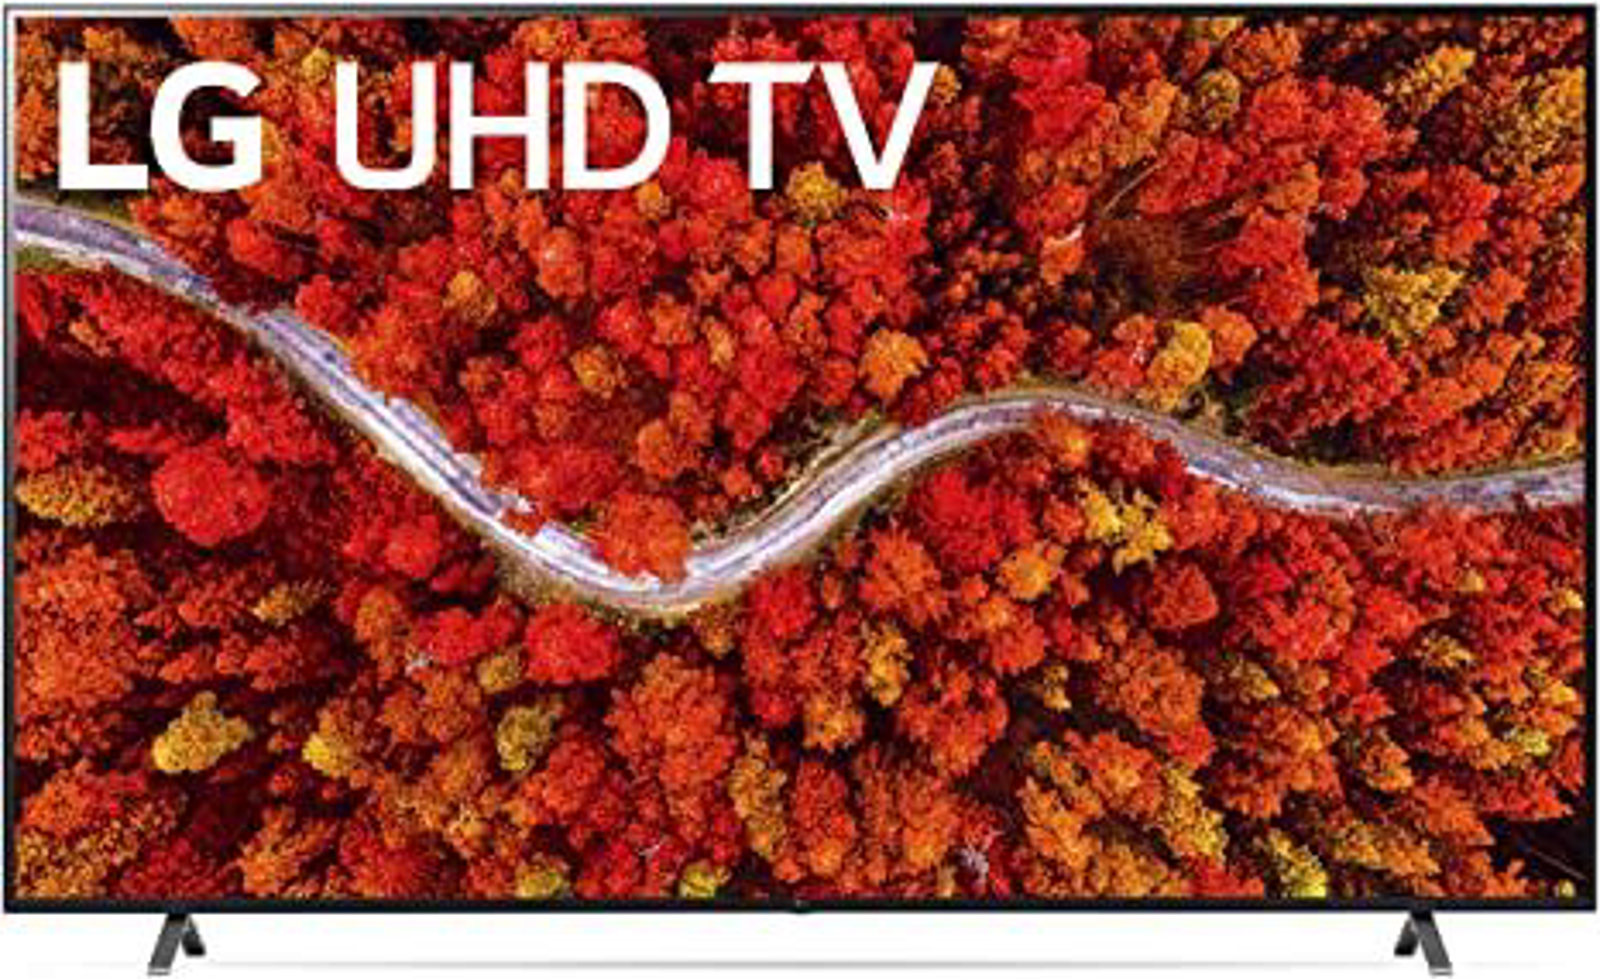 Picture of LG 86" Class 4K UHD Smart webOS LED TV